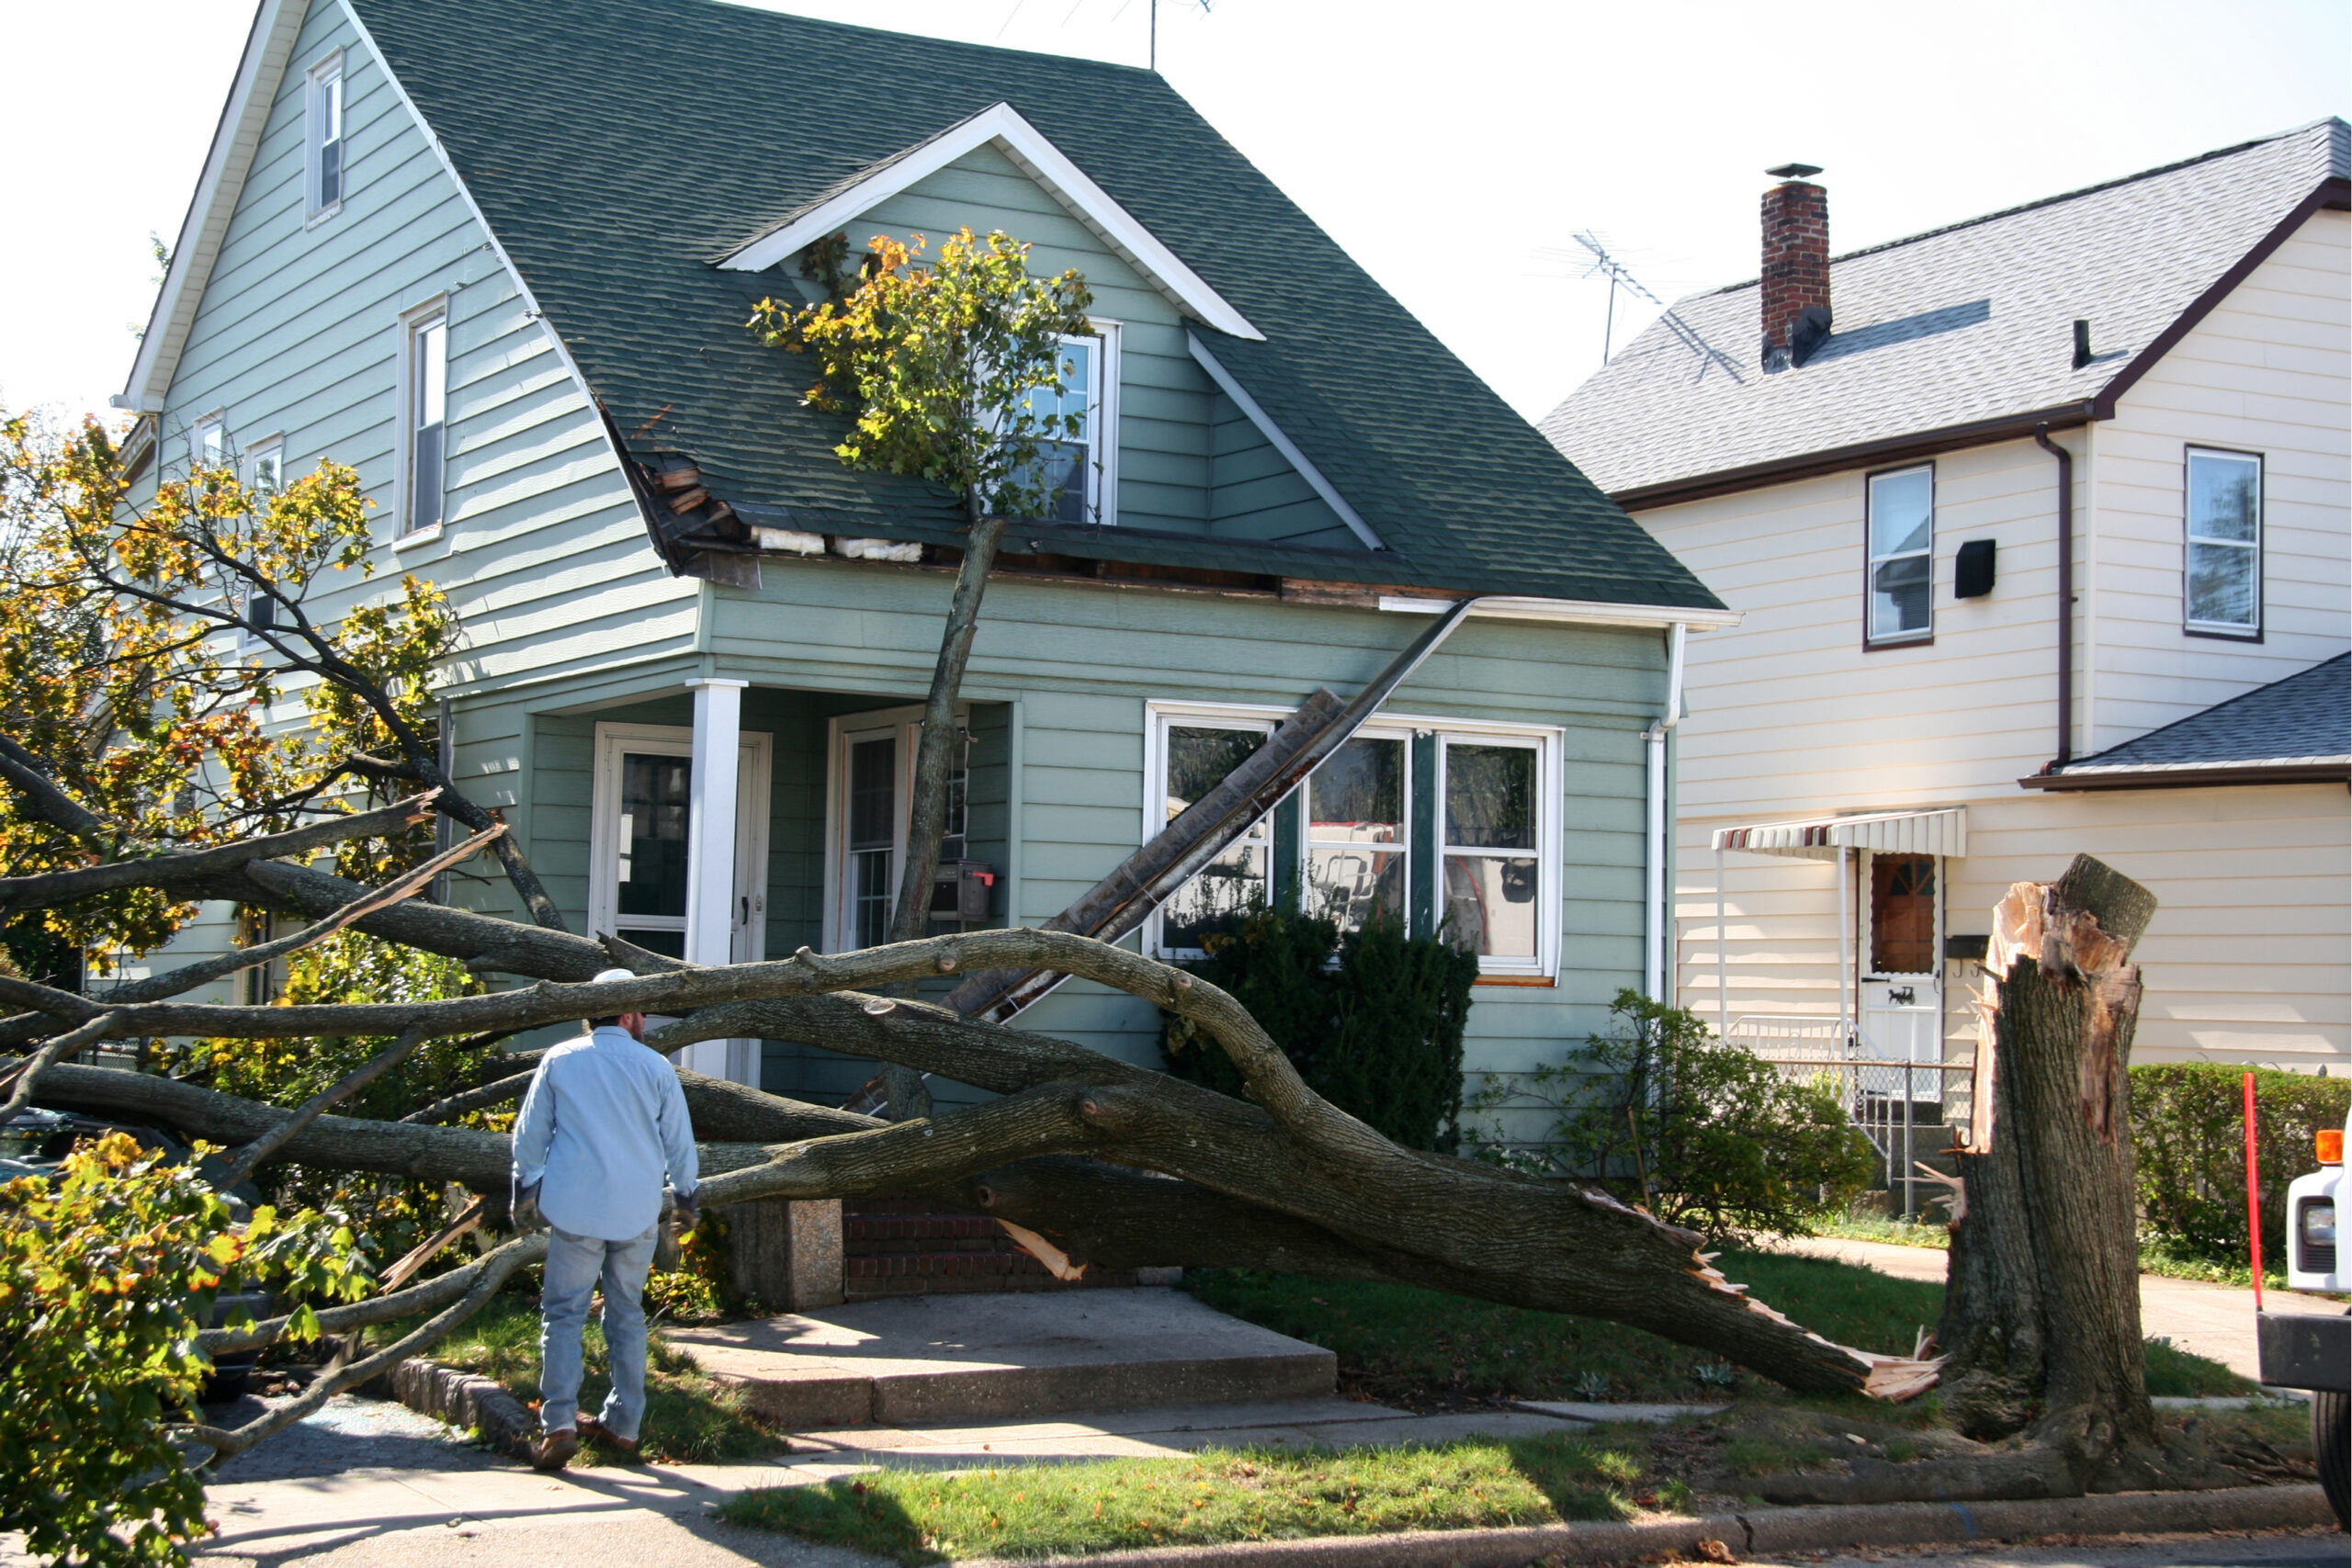 A home damaged in a storm by a fallen tree.